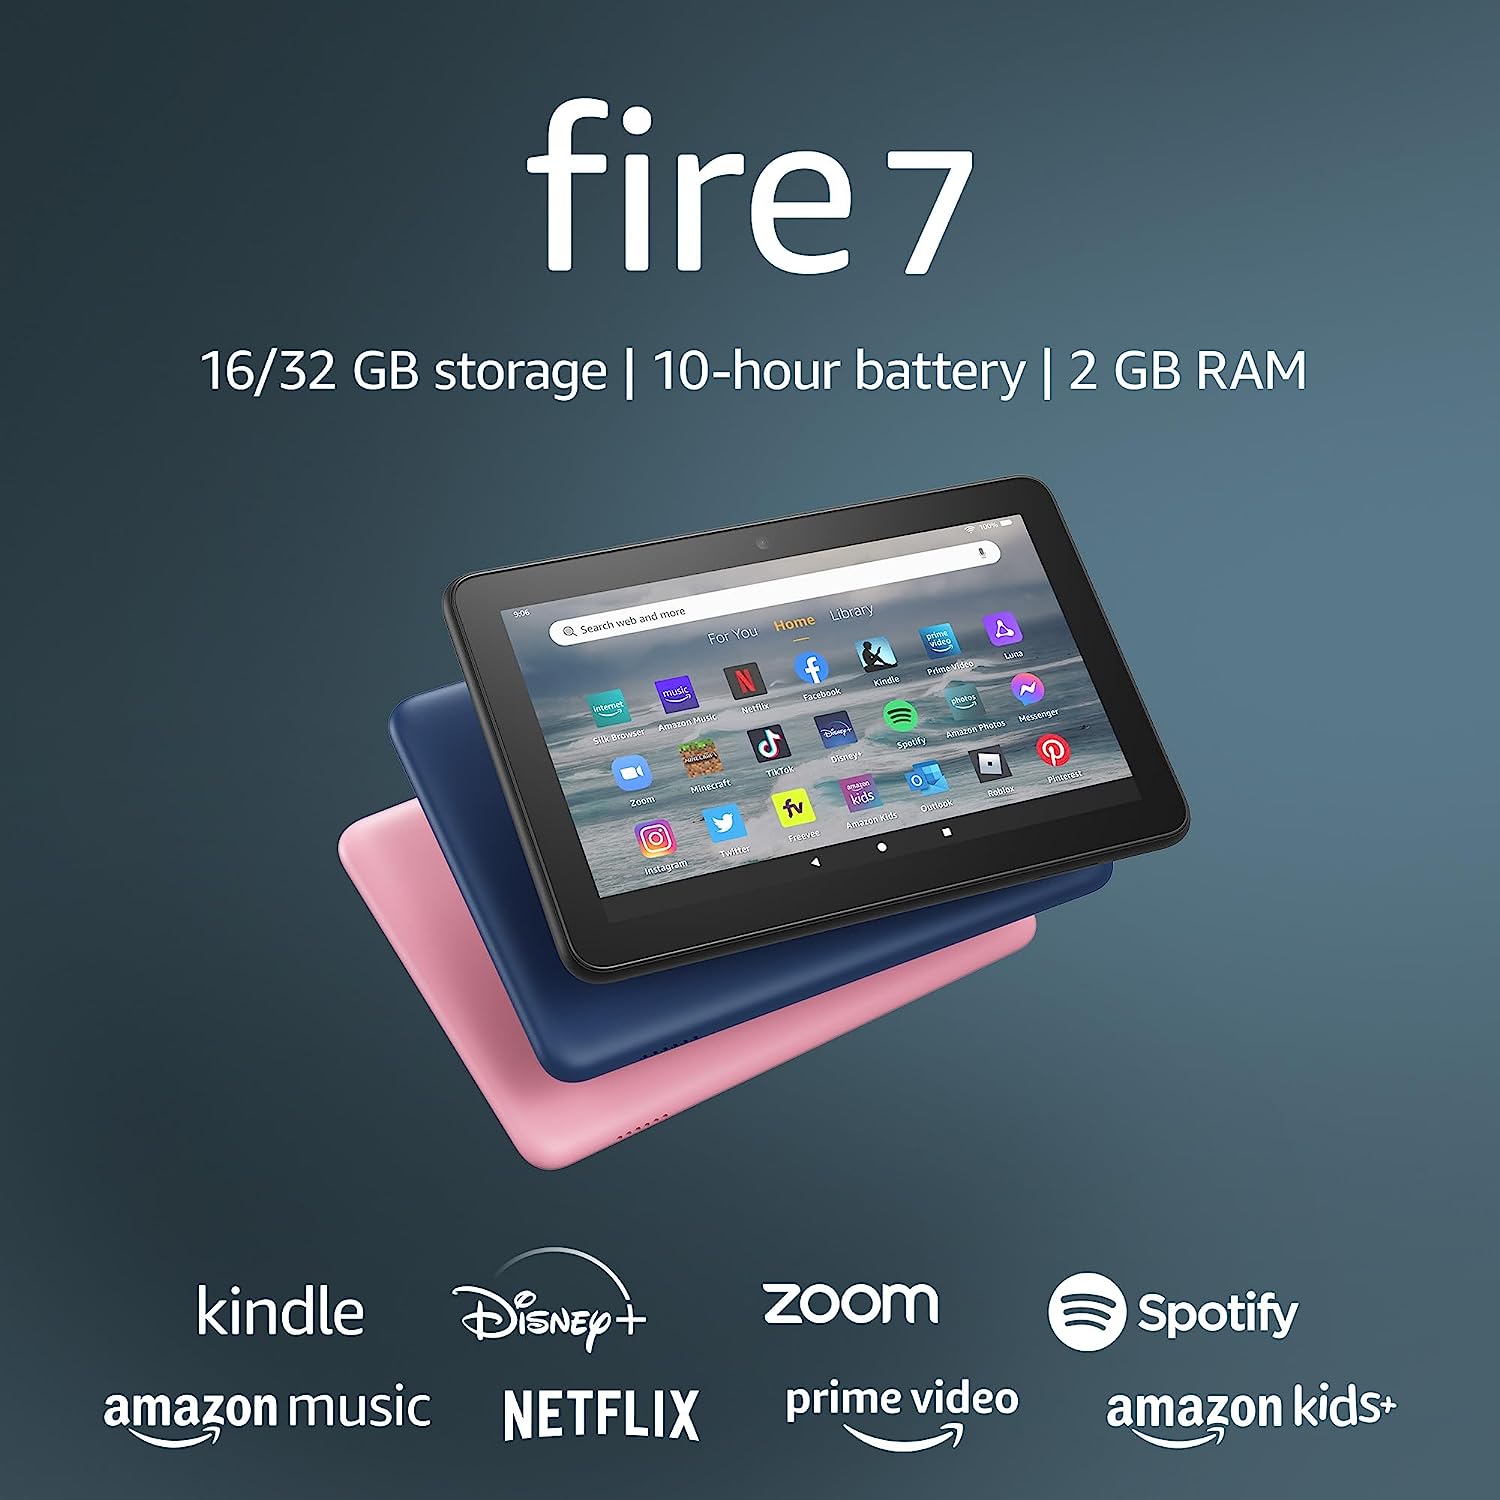 Amazon Fire 7 tablet, 7” display, 16 GB, 10 hours [...]